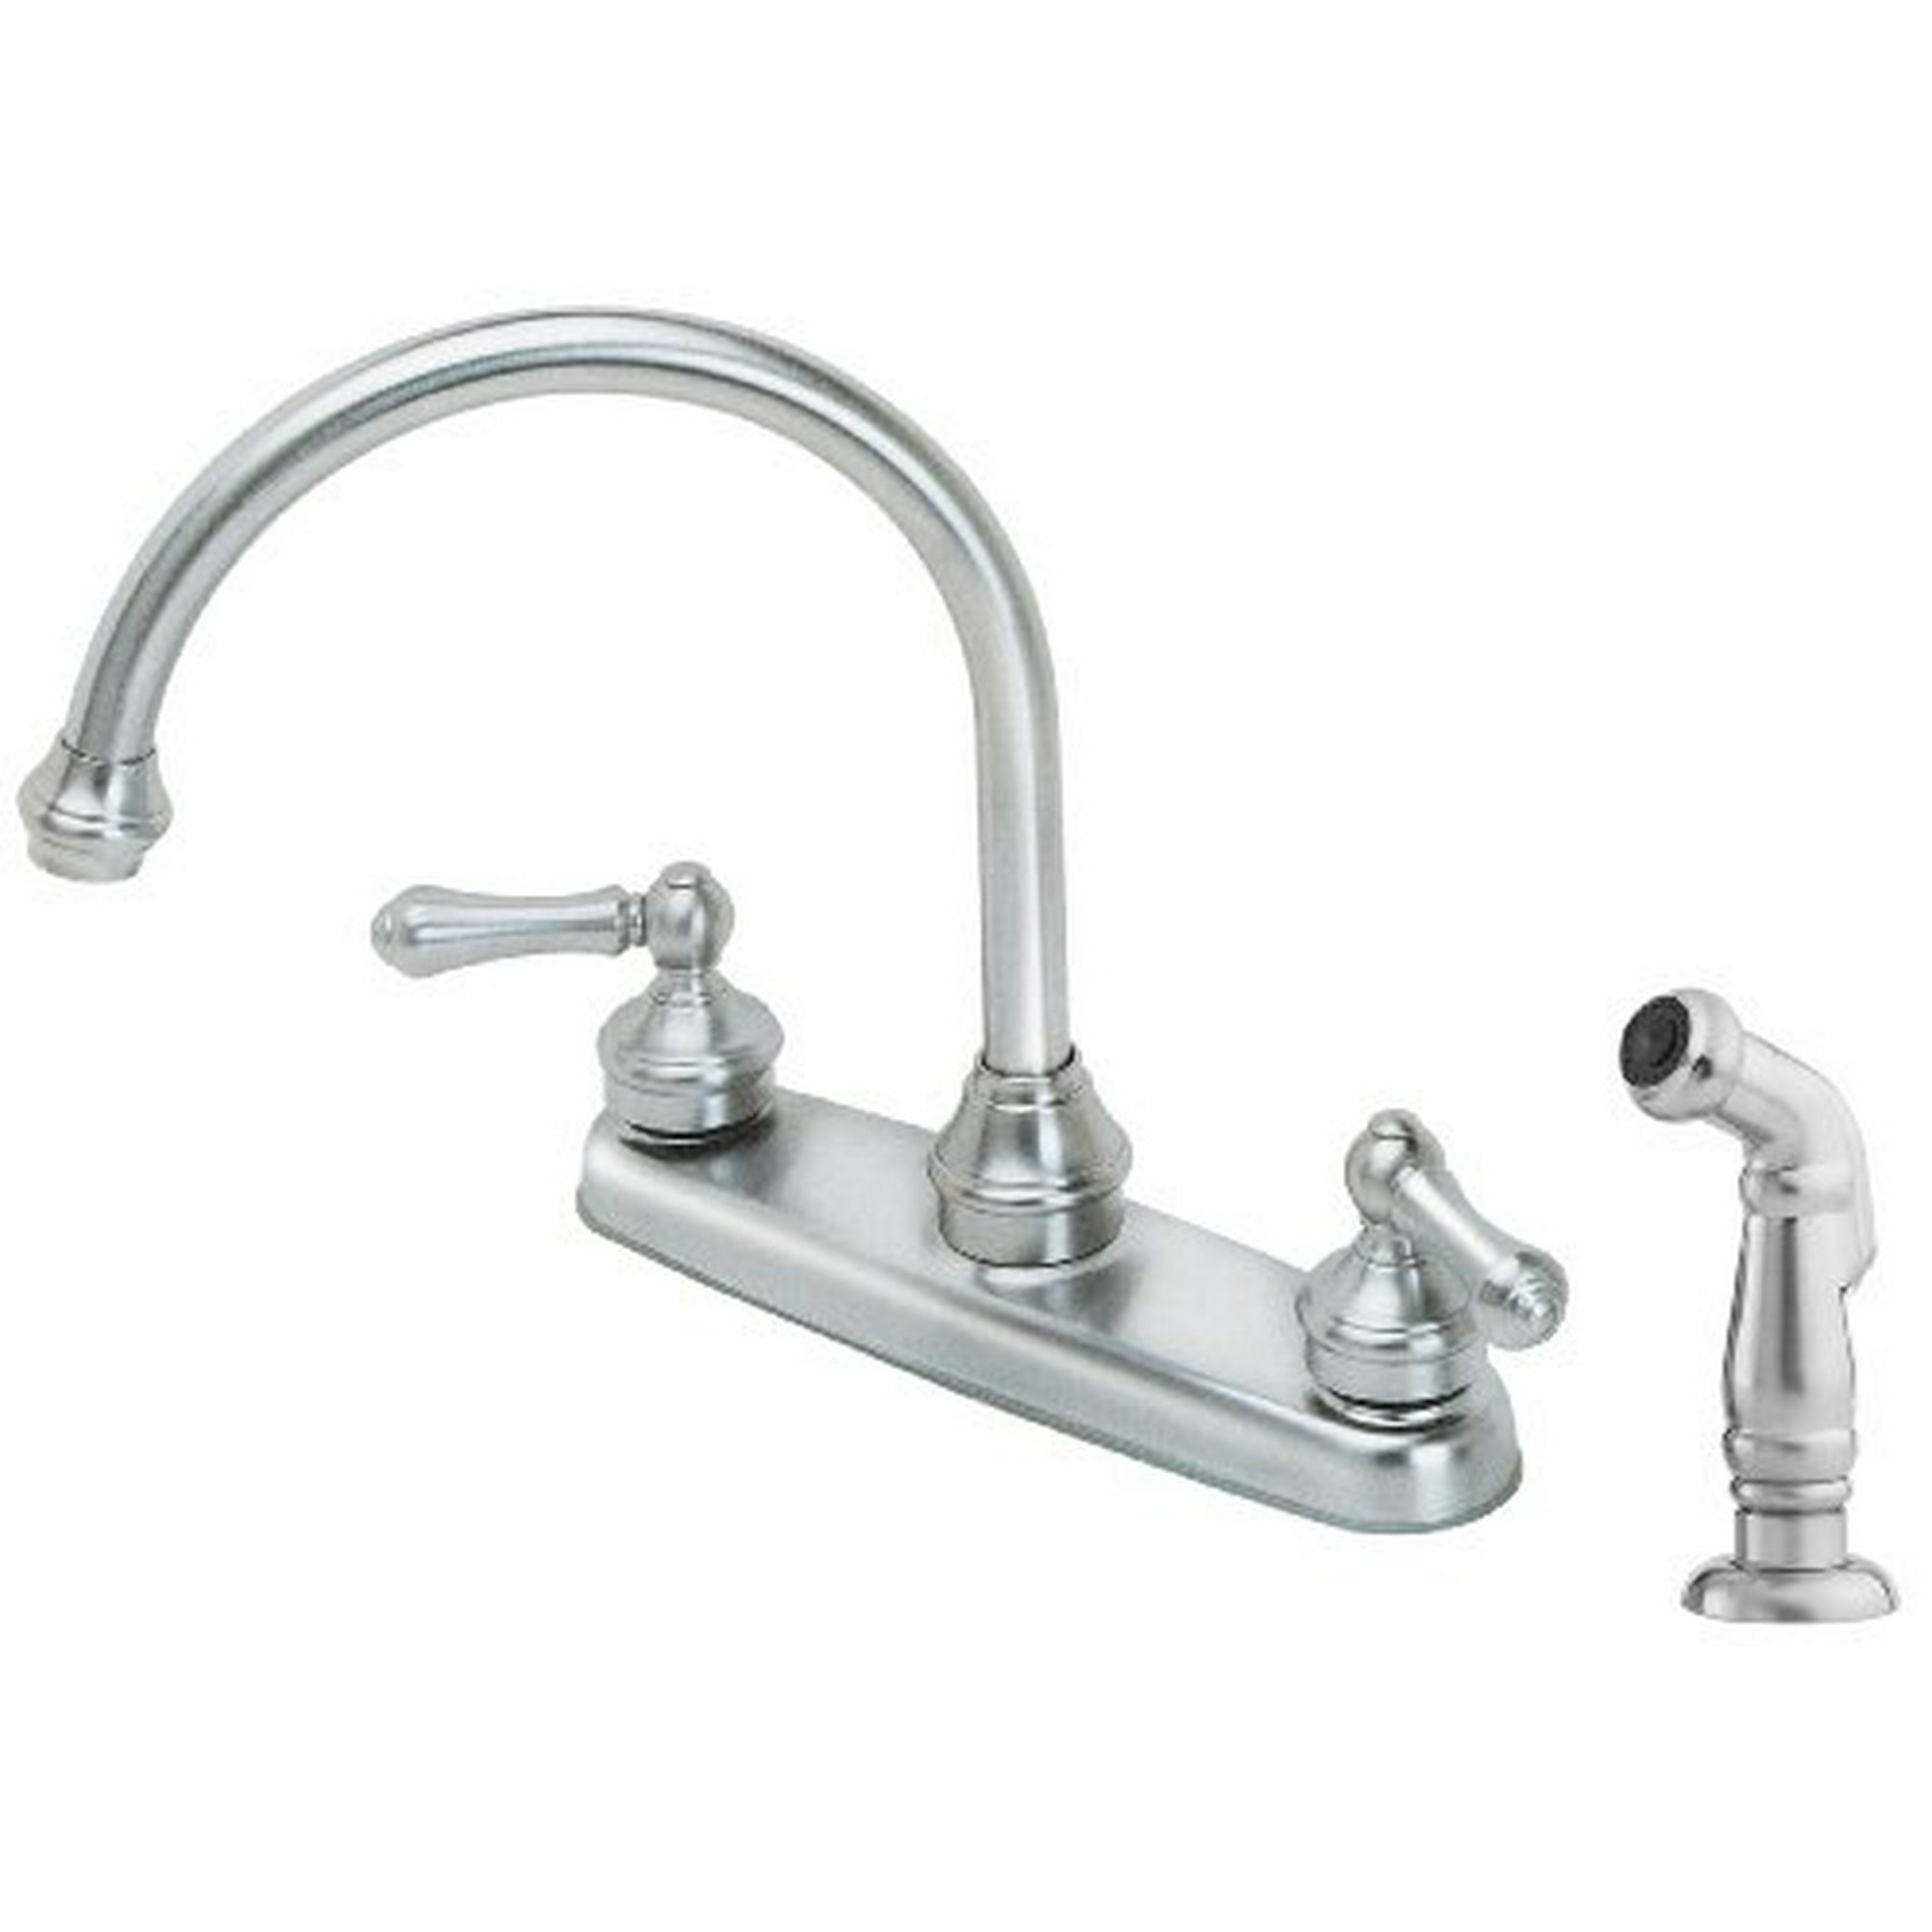 Pfister Lf8h685ss Savannah 2 Handle Kitchen Faucet With Side Spray